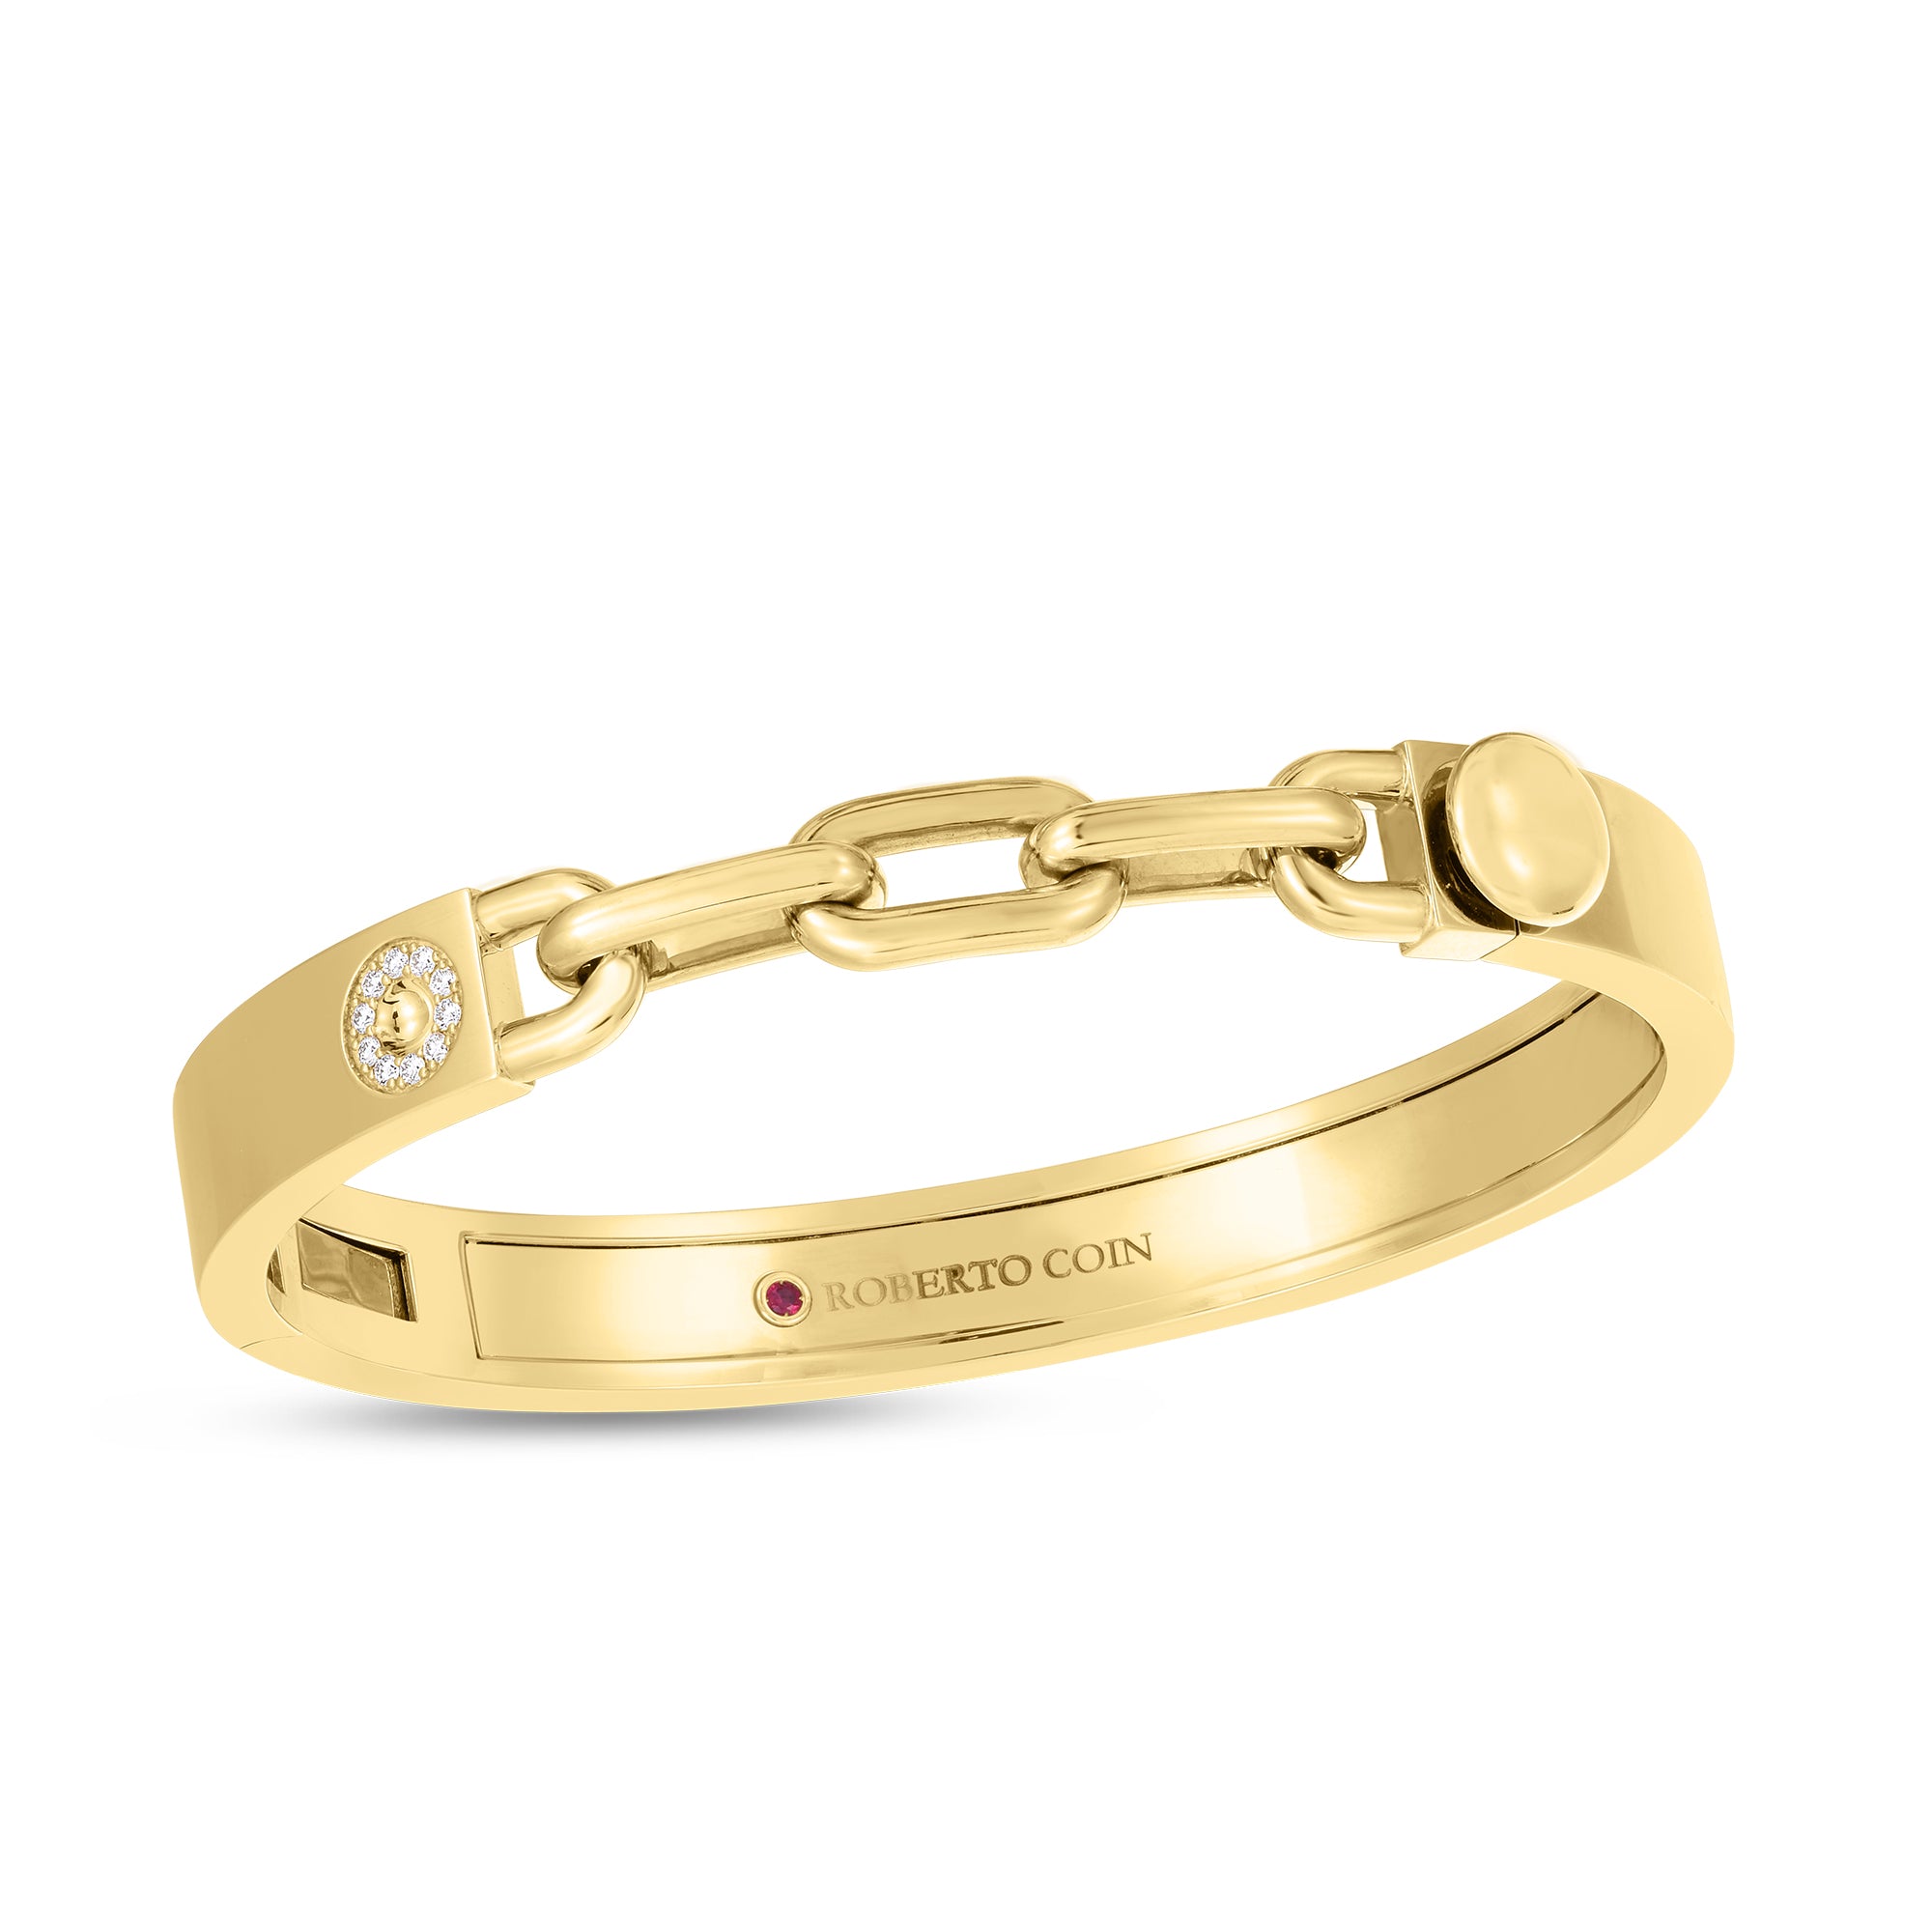 18K YELLOW GOLD NAVARRA DIAMOND ACCENT WITH 3 LINK CHAIN BANGLE